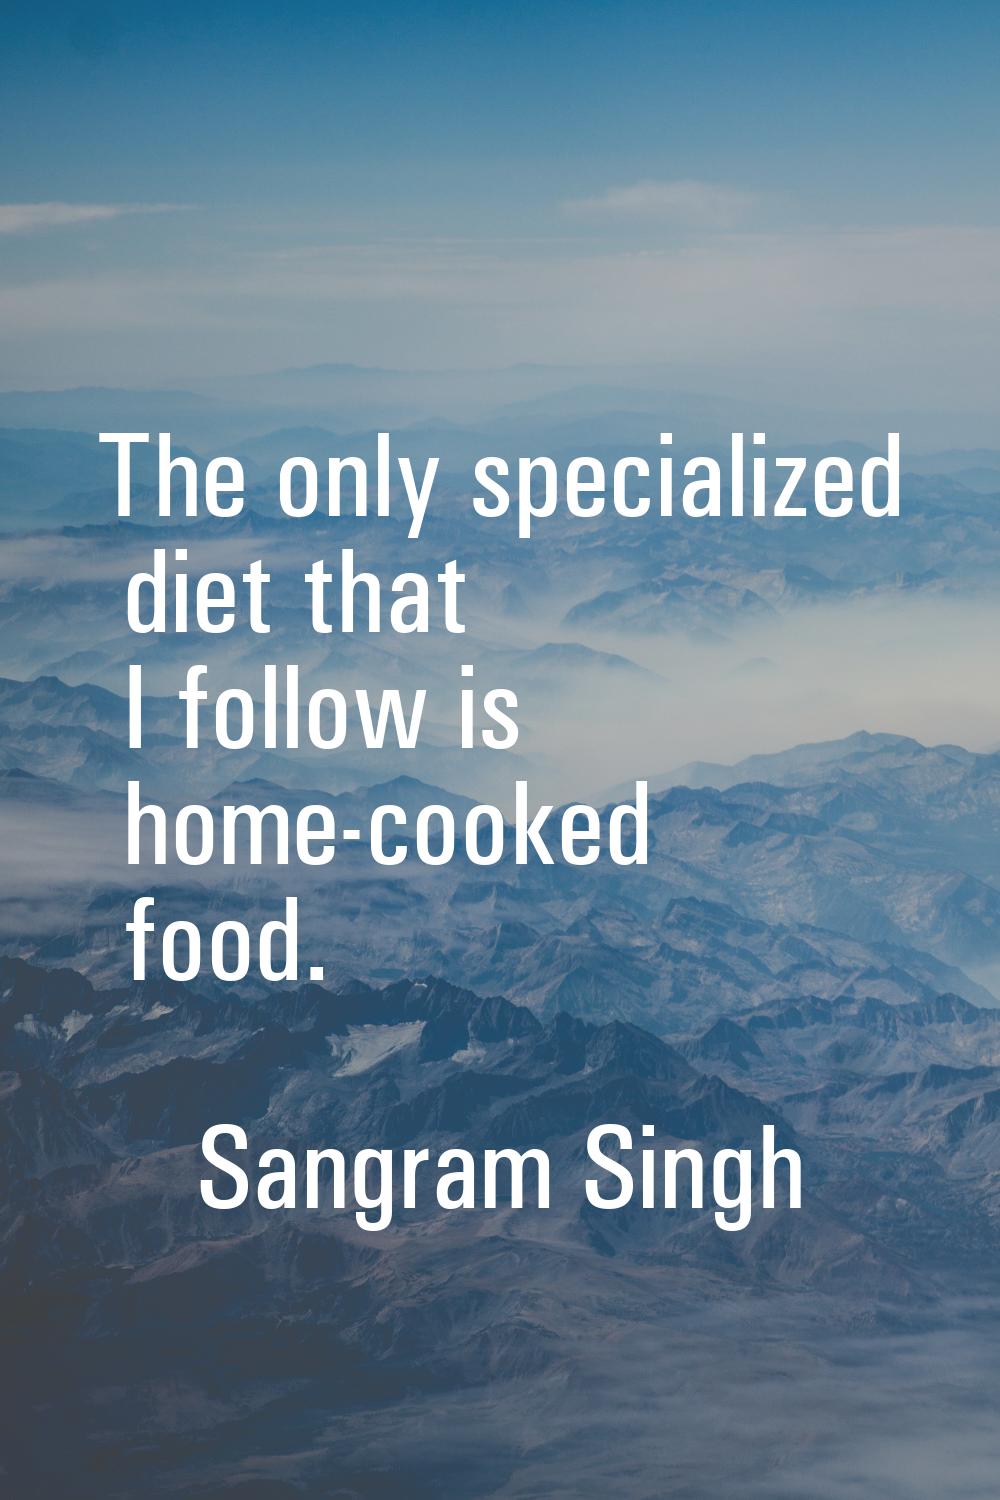 The only specialized diet that I follow is home-cooked food.